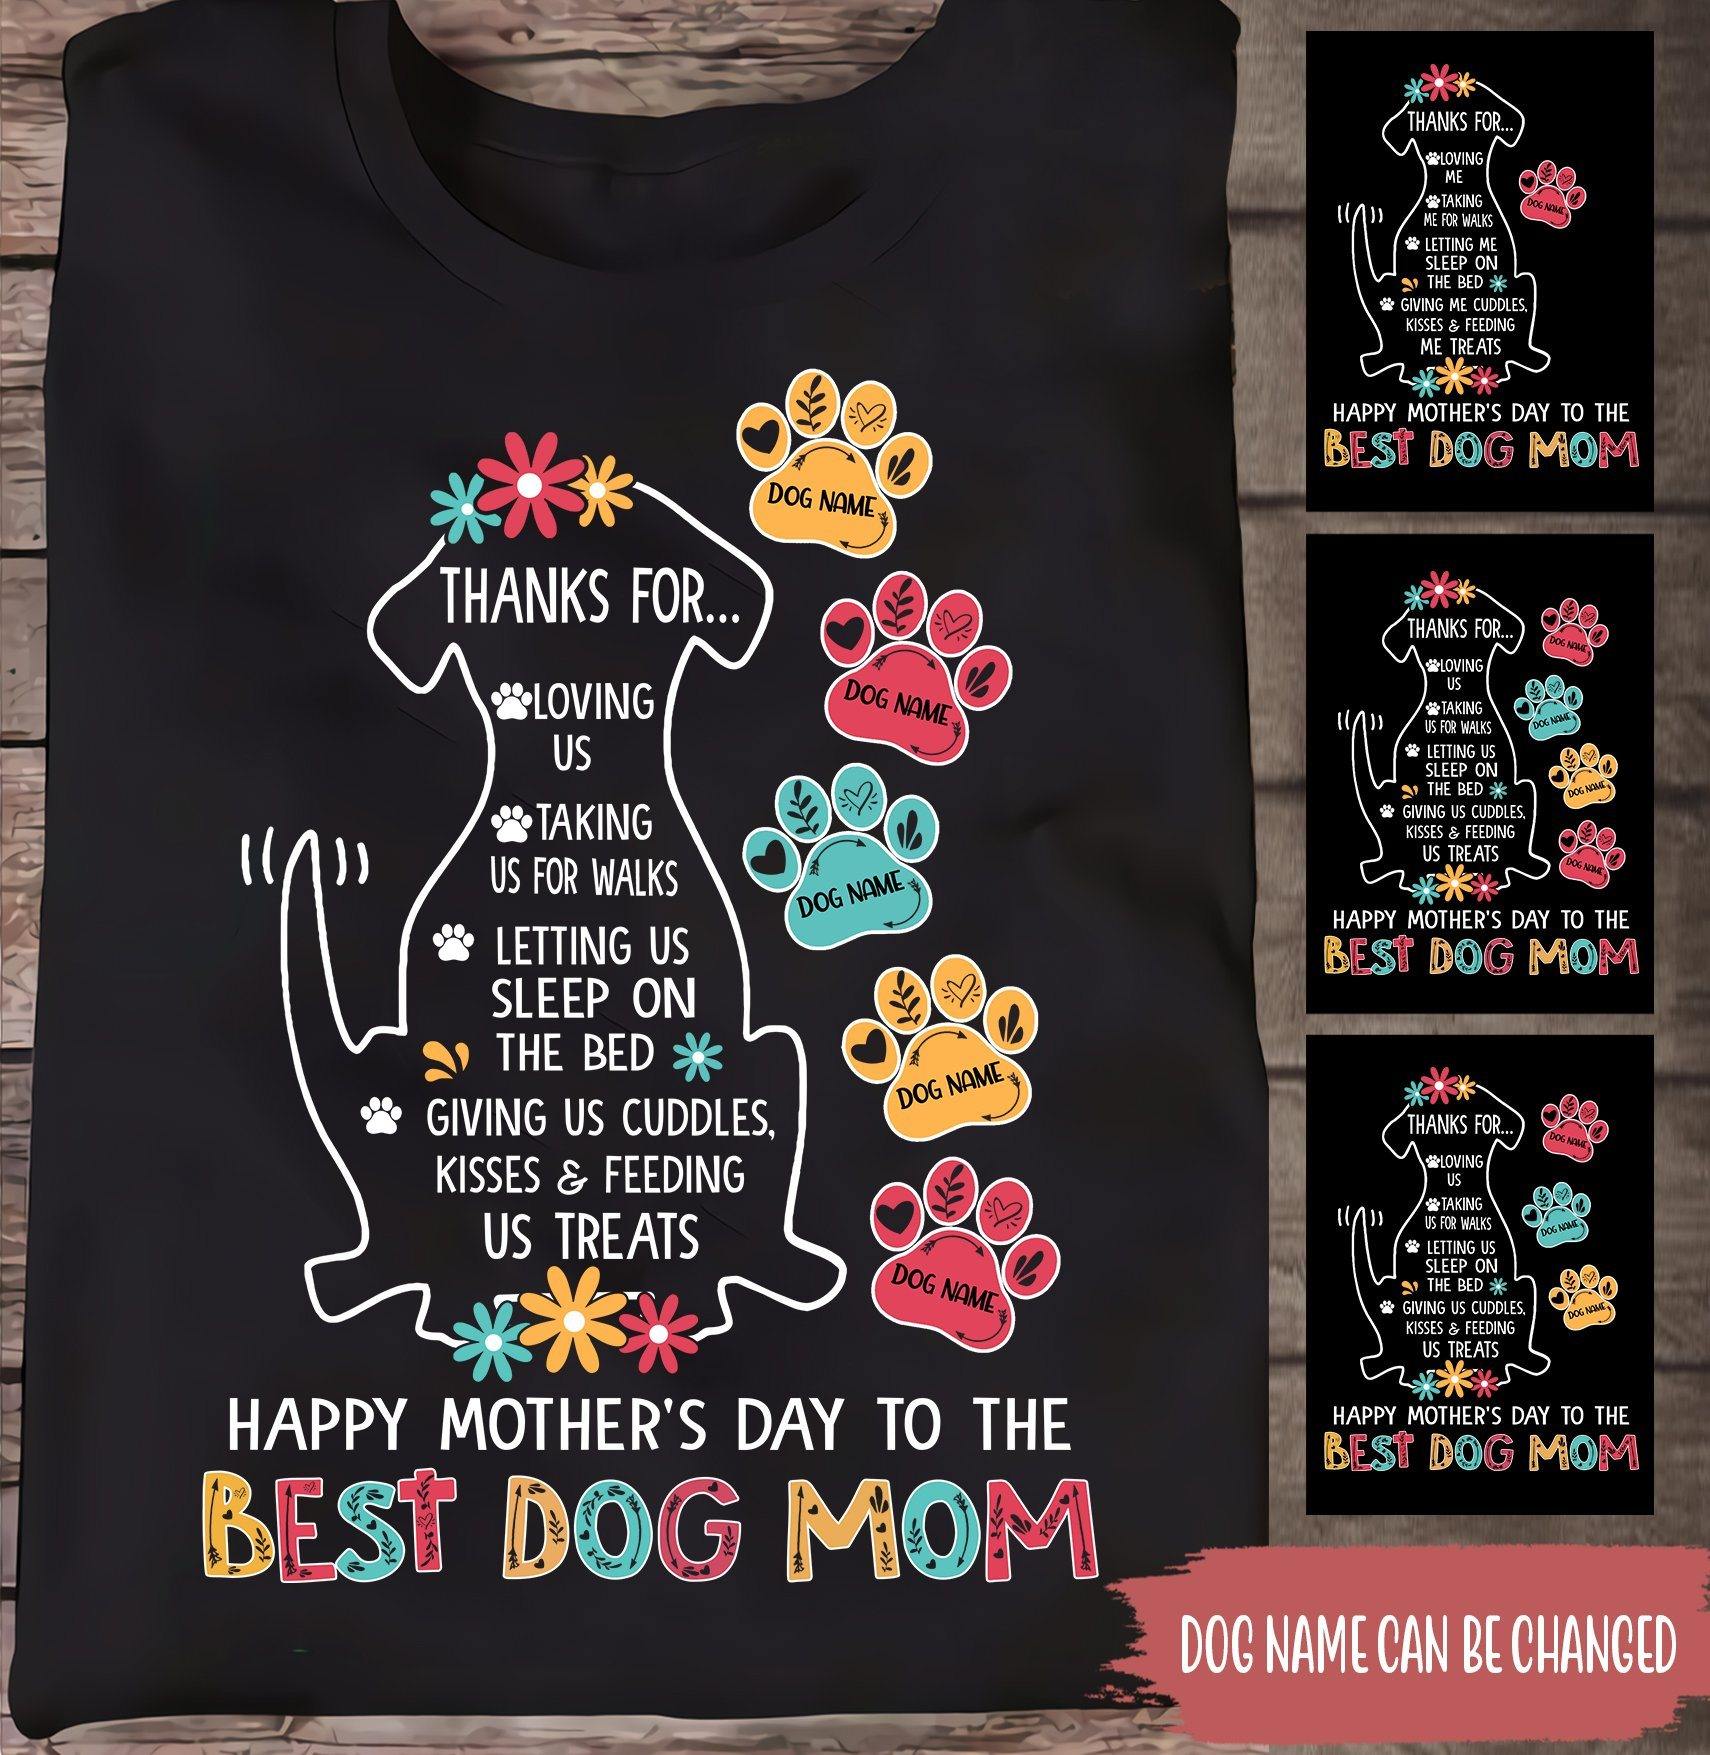 https://cdn.shopify.com/s/files/1/0281/9460/3142/products/dog-custom-t-shirt-happy-mother-s-day-to-the-best-dog-mom-personalized-gift-personal84_2000x.jpg?v=1640841774